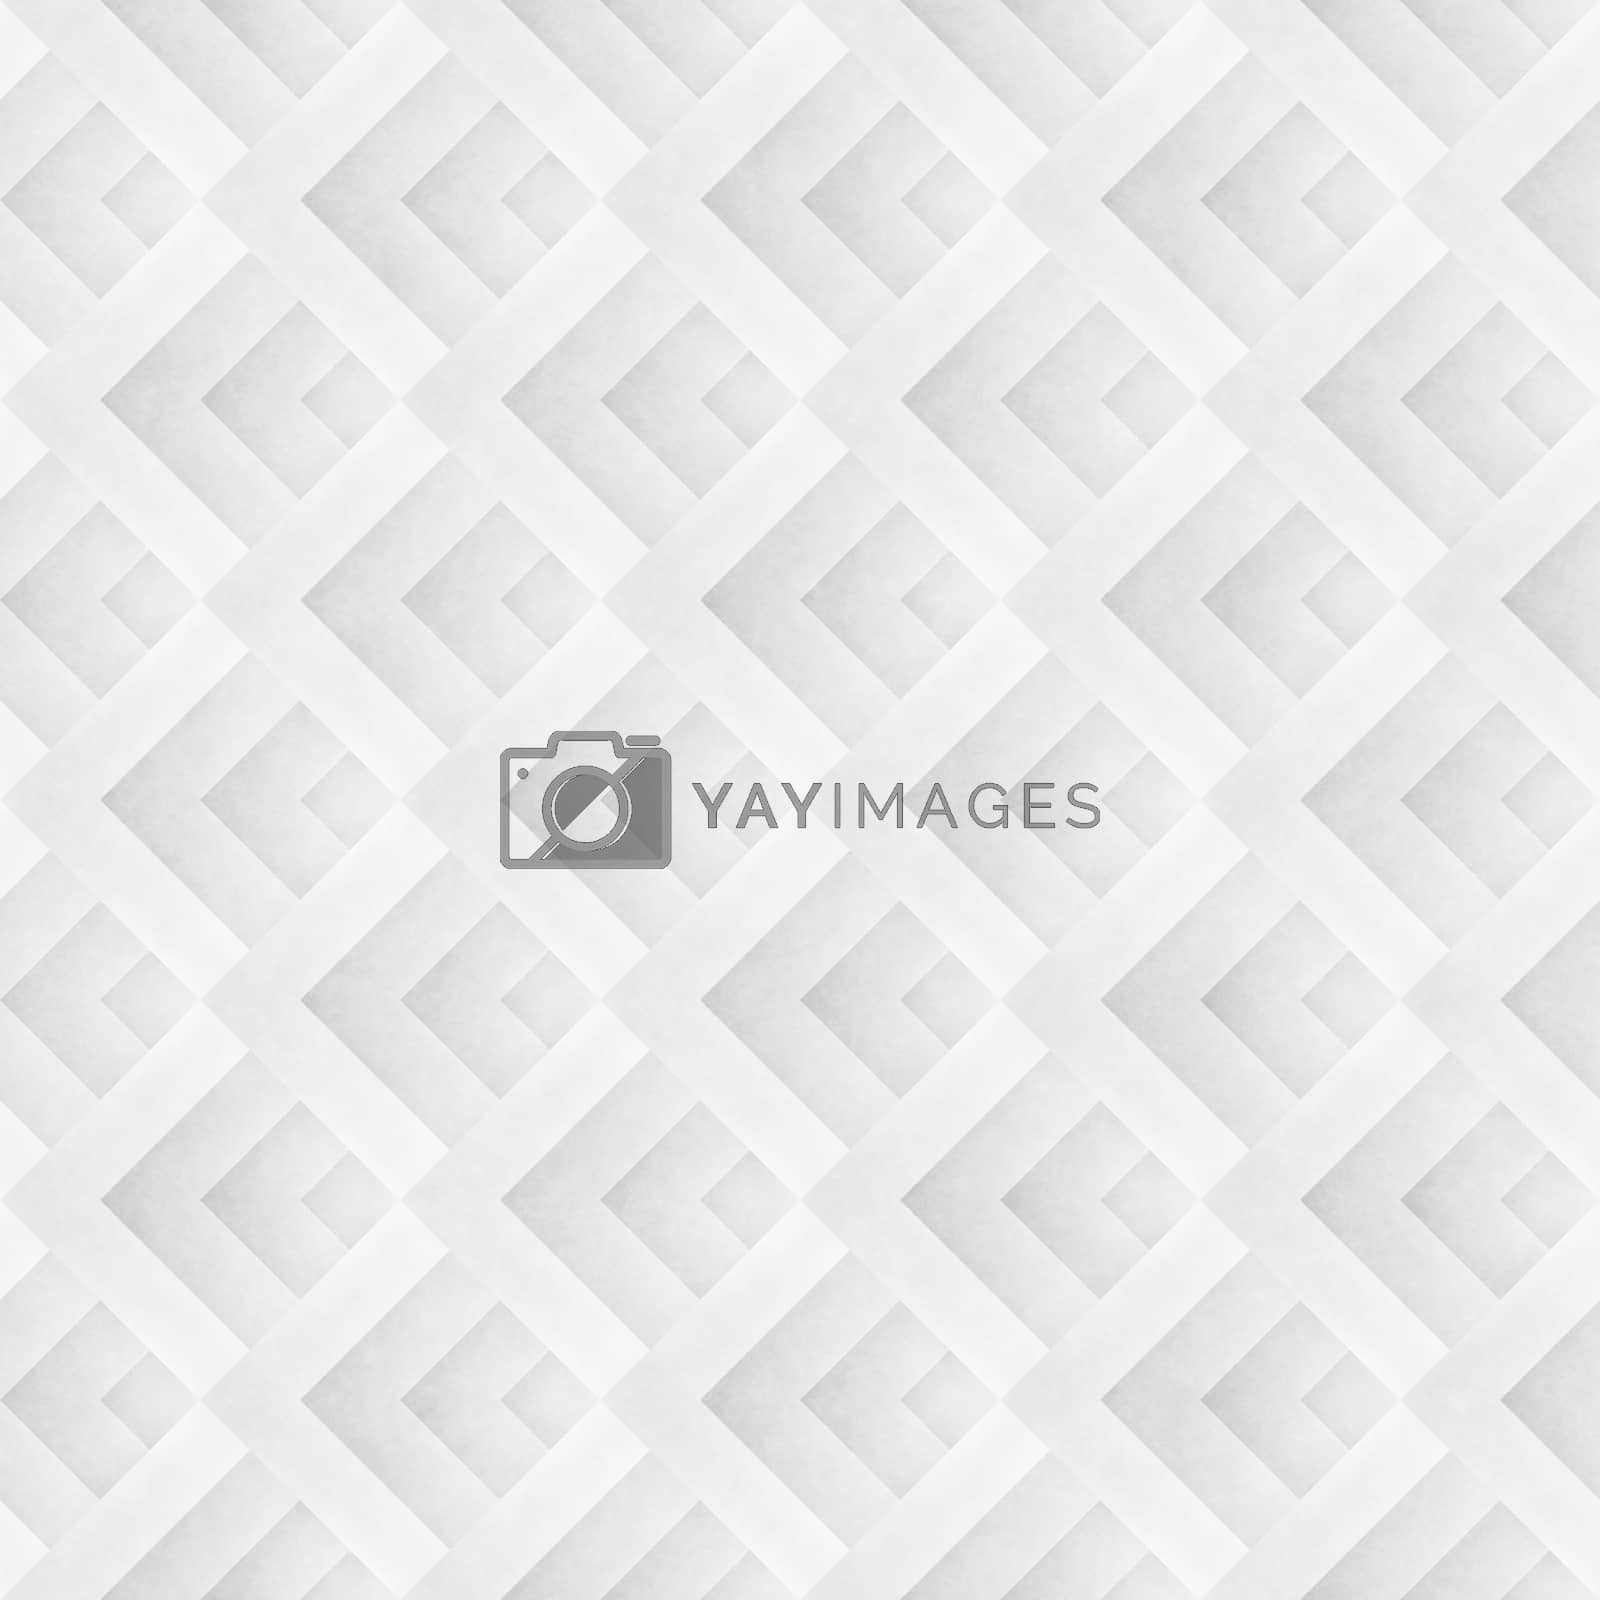 Royalty free image of Seamles Gradient Rhombus Grid Pattern. Abstract Geometric Background Design by CreatorsClub